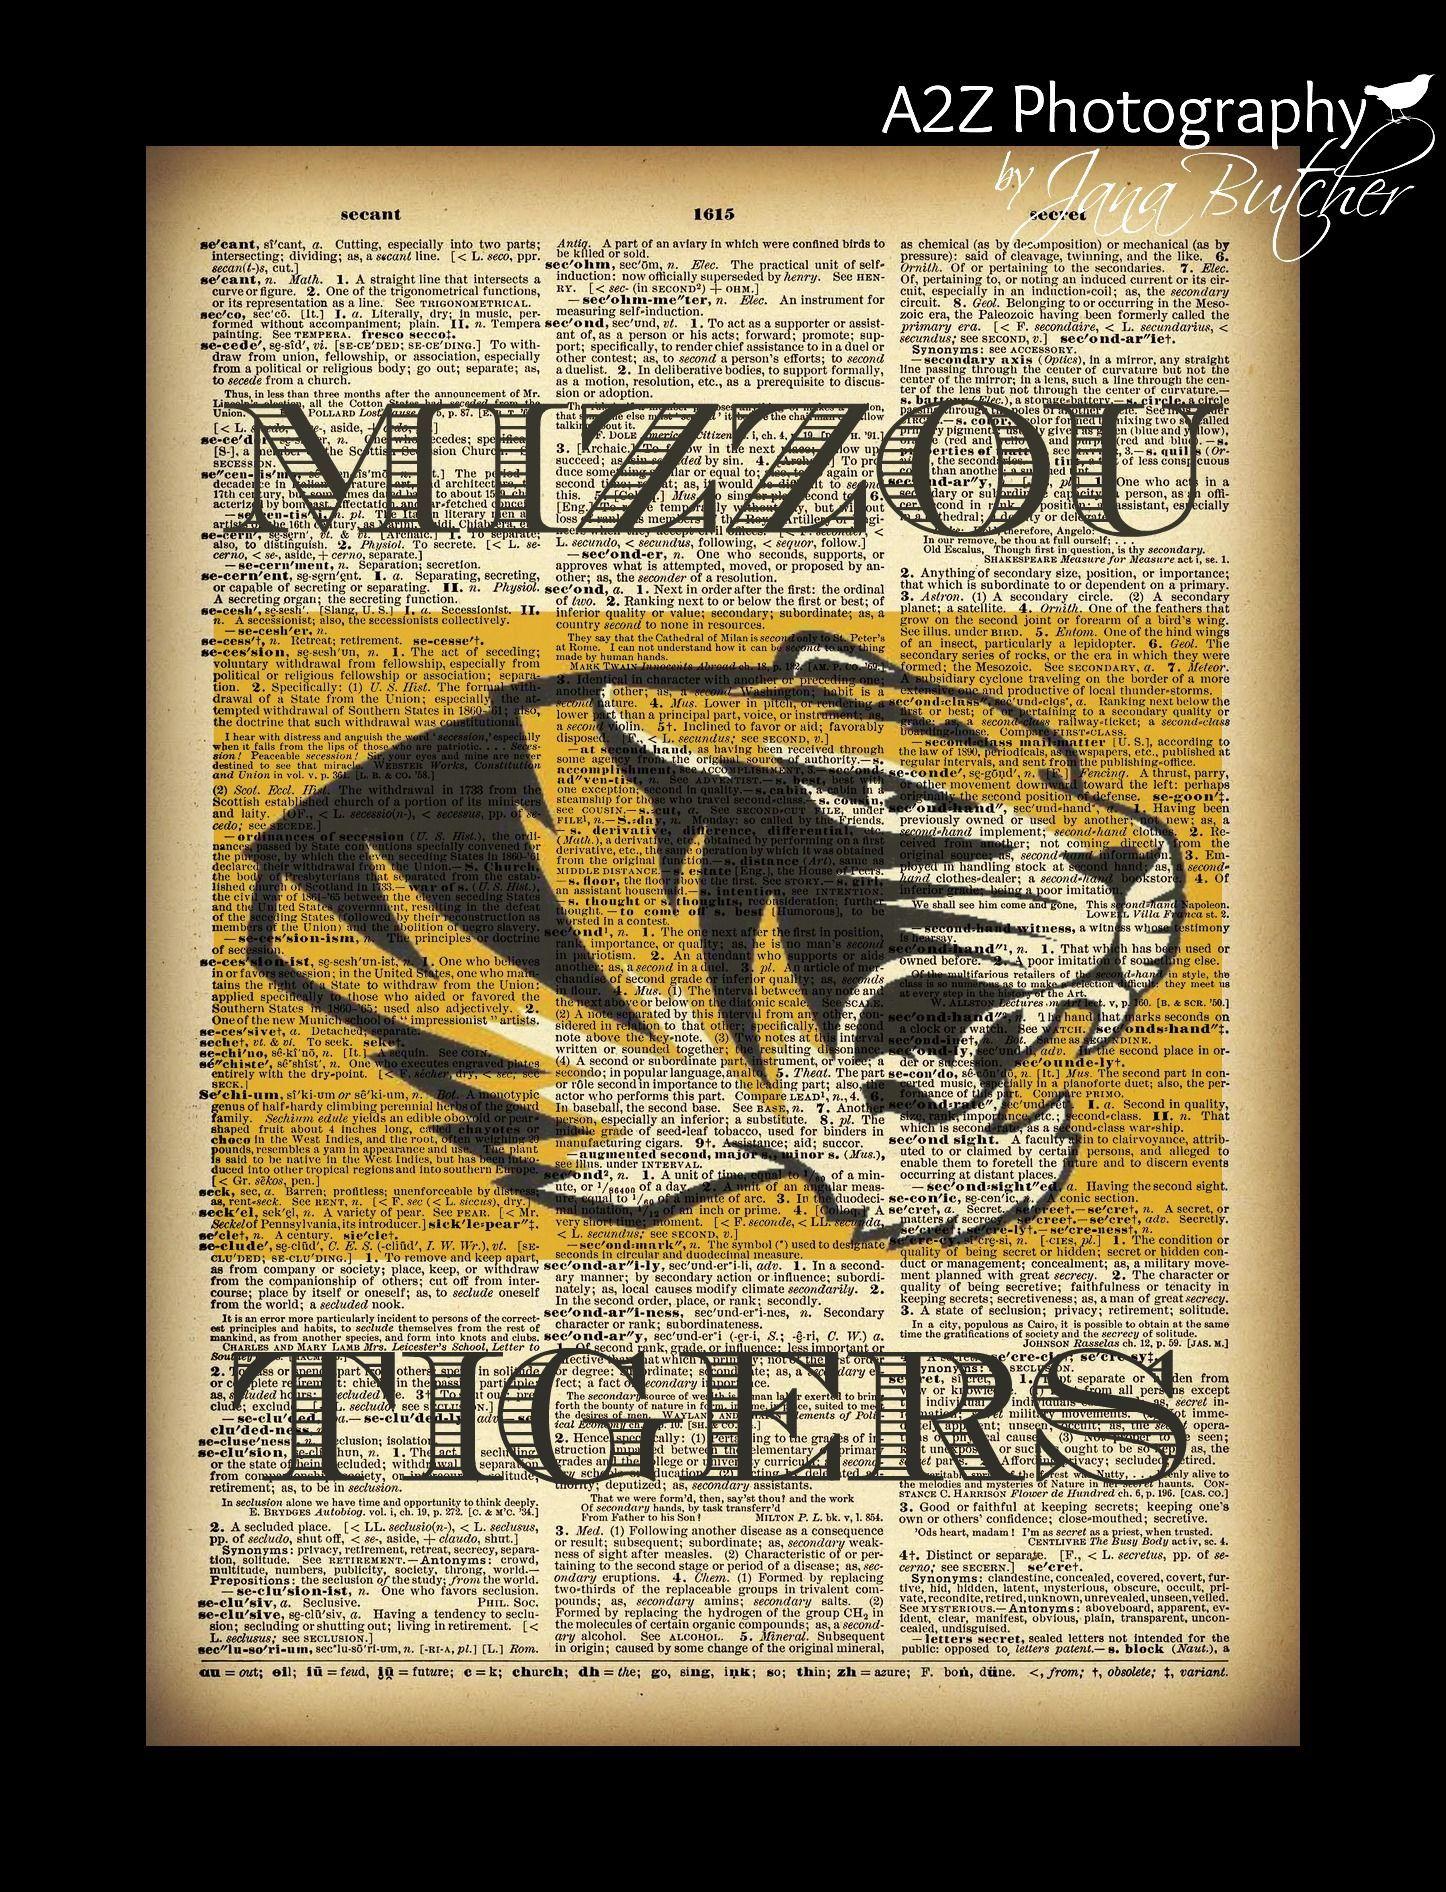 Mizzou Tigers Dictionary art 8x10 Print by A2Z Photography A perfect